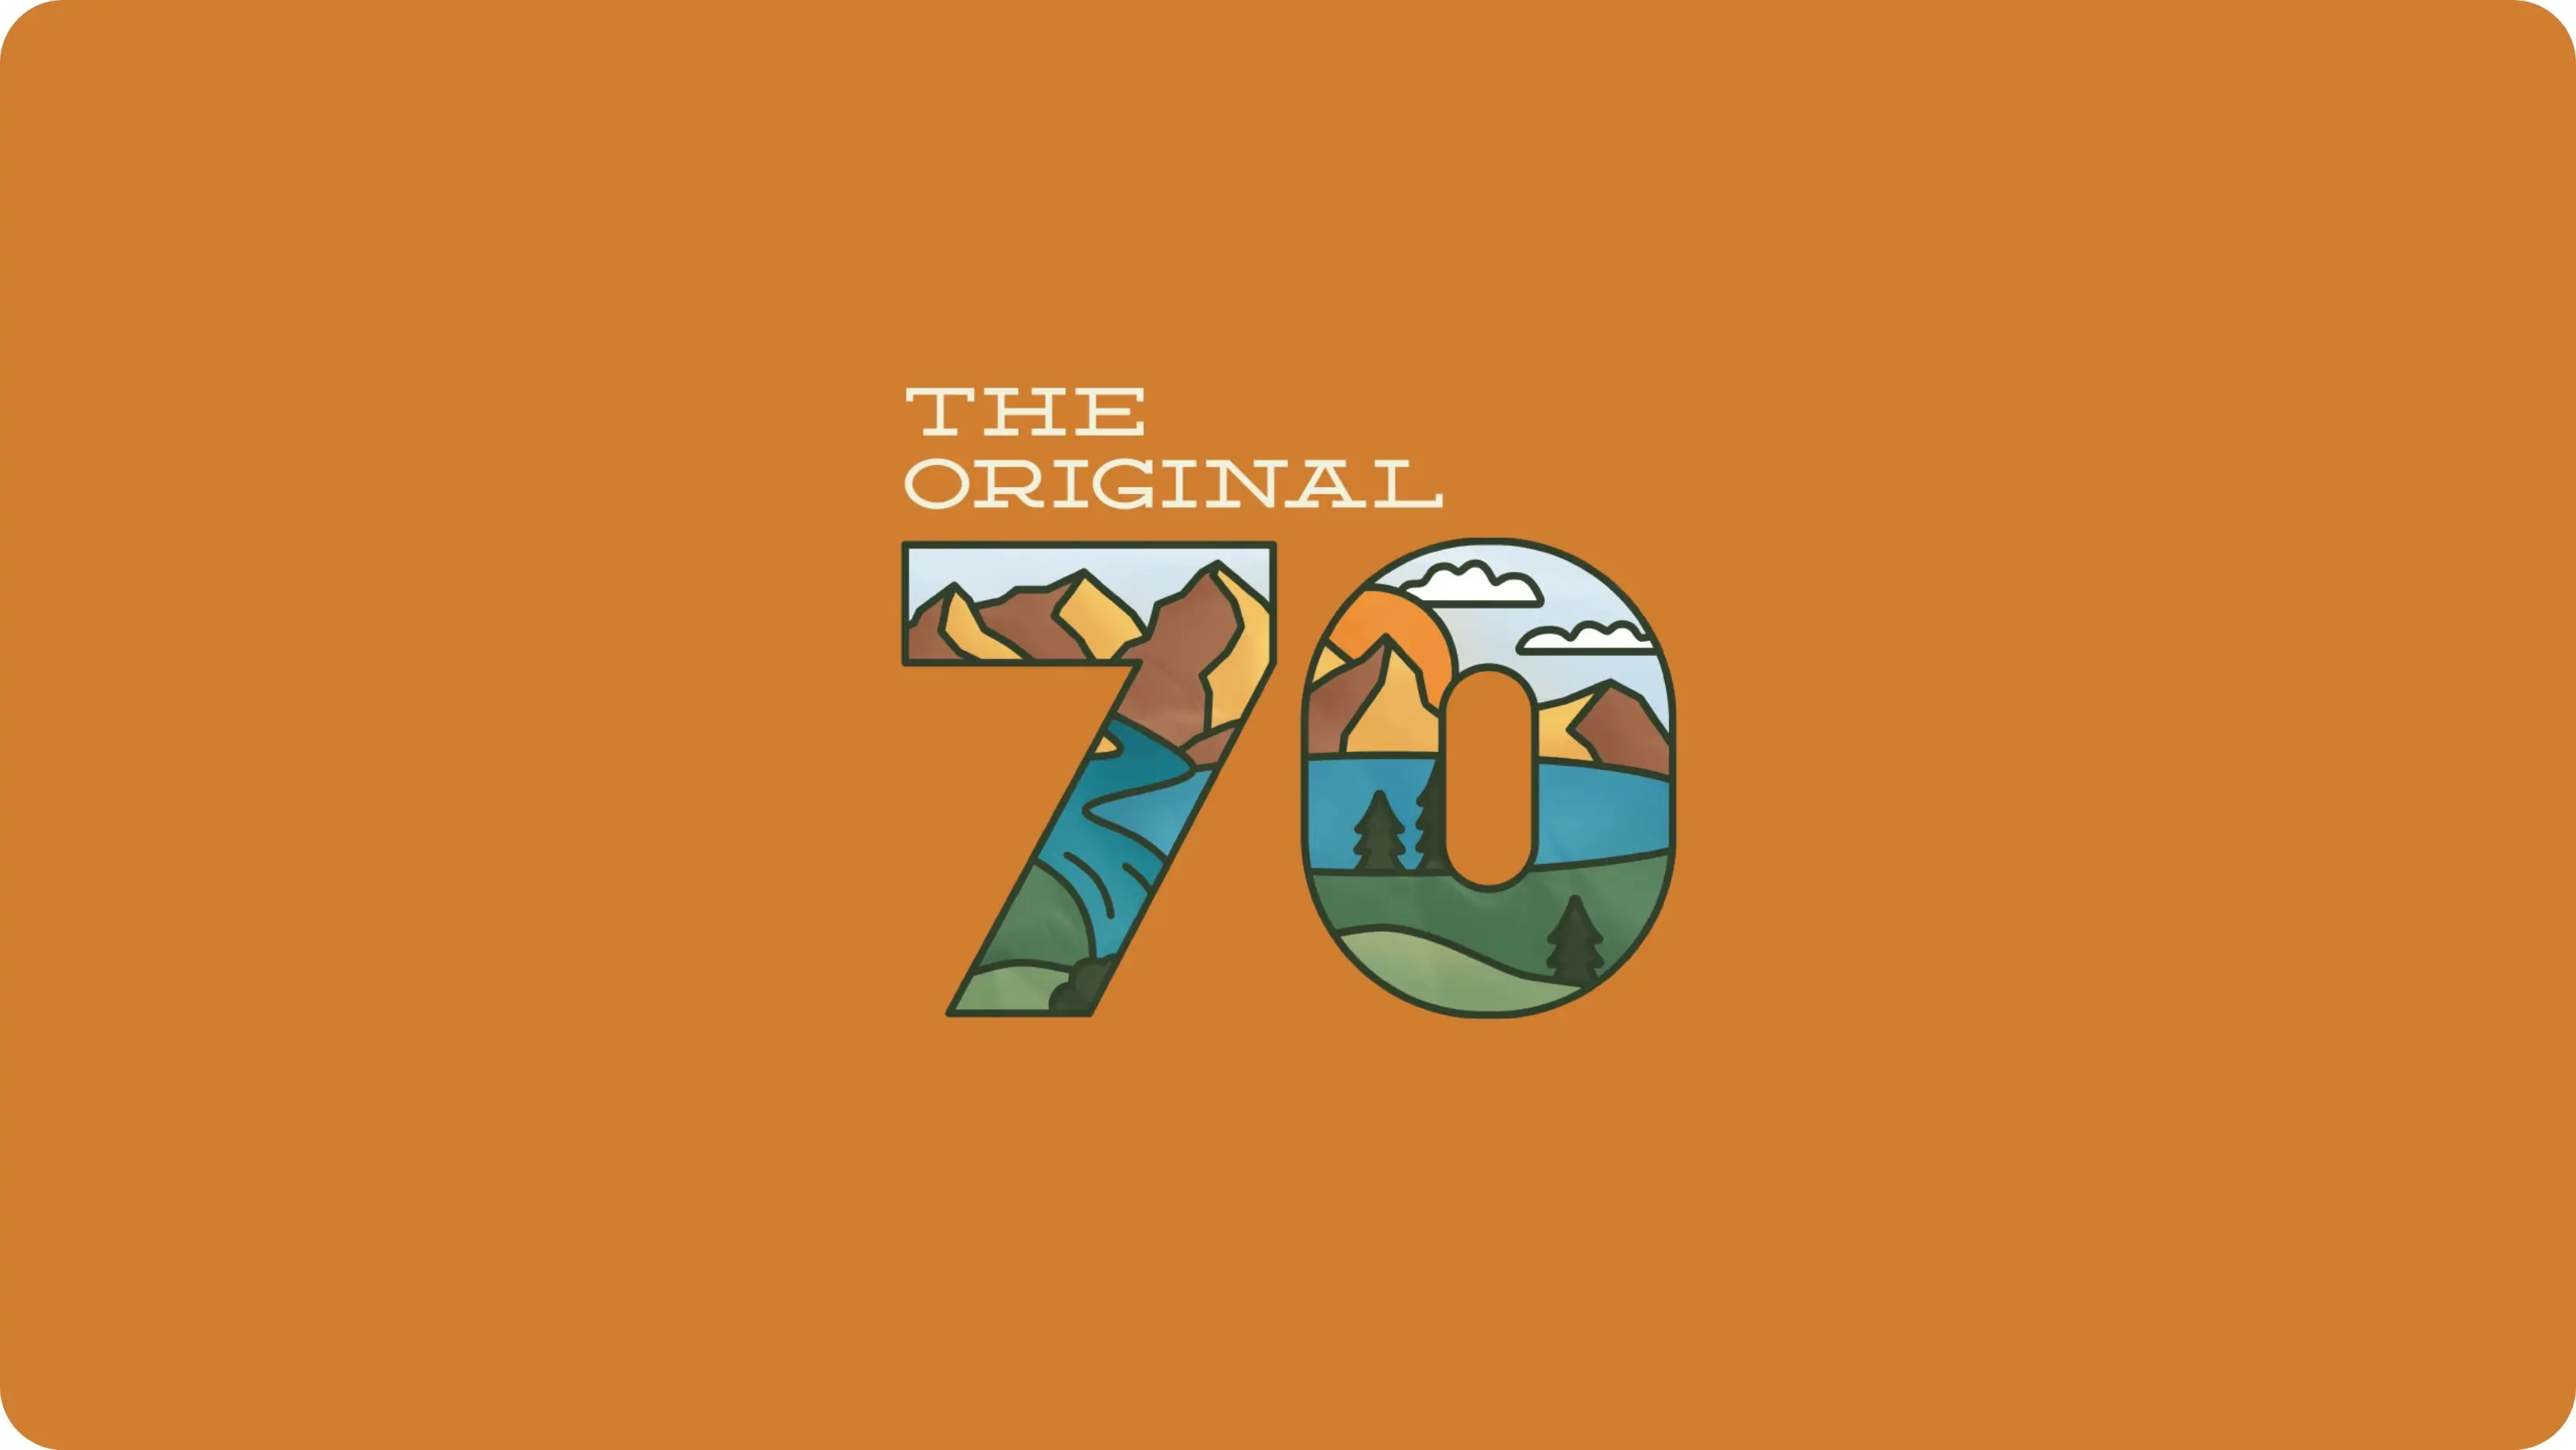 image from nalgene's website for marketing. Brownish orange background with the text "The Original 70"